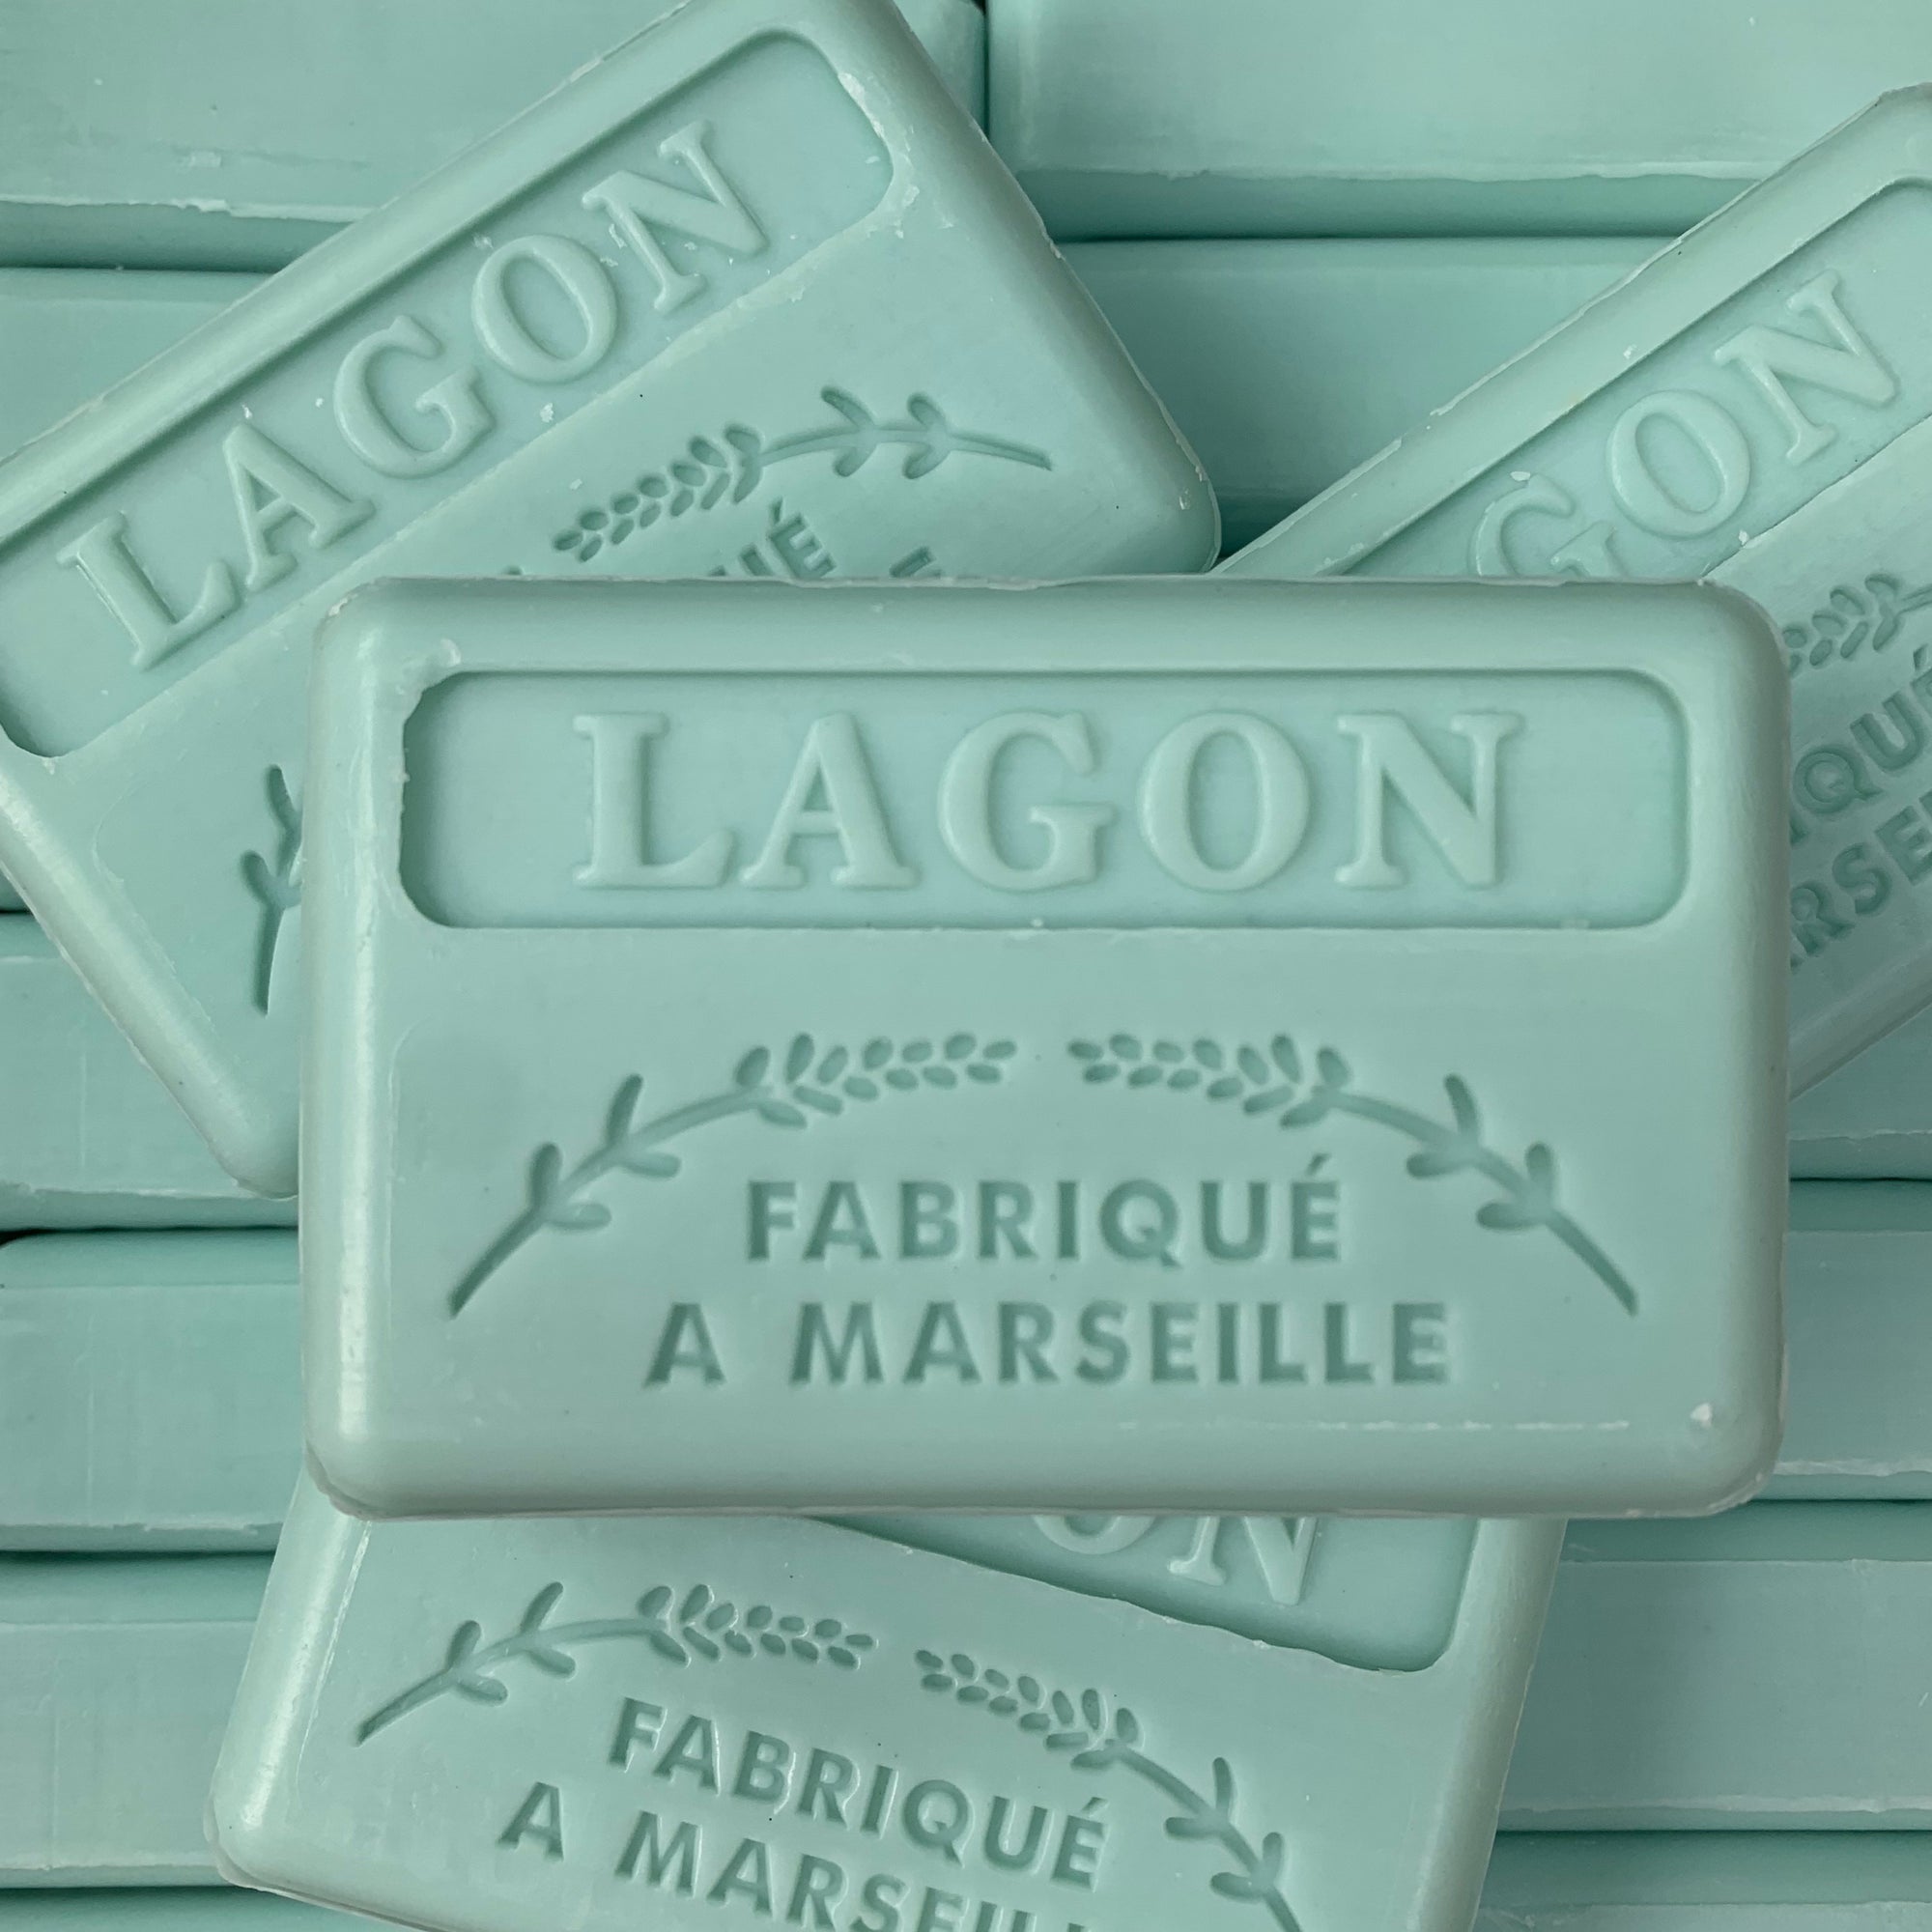 lagon french soap for lagoon